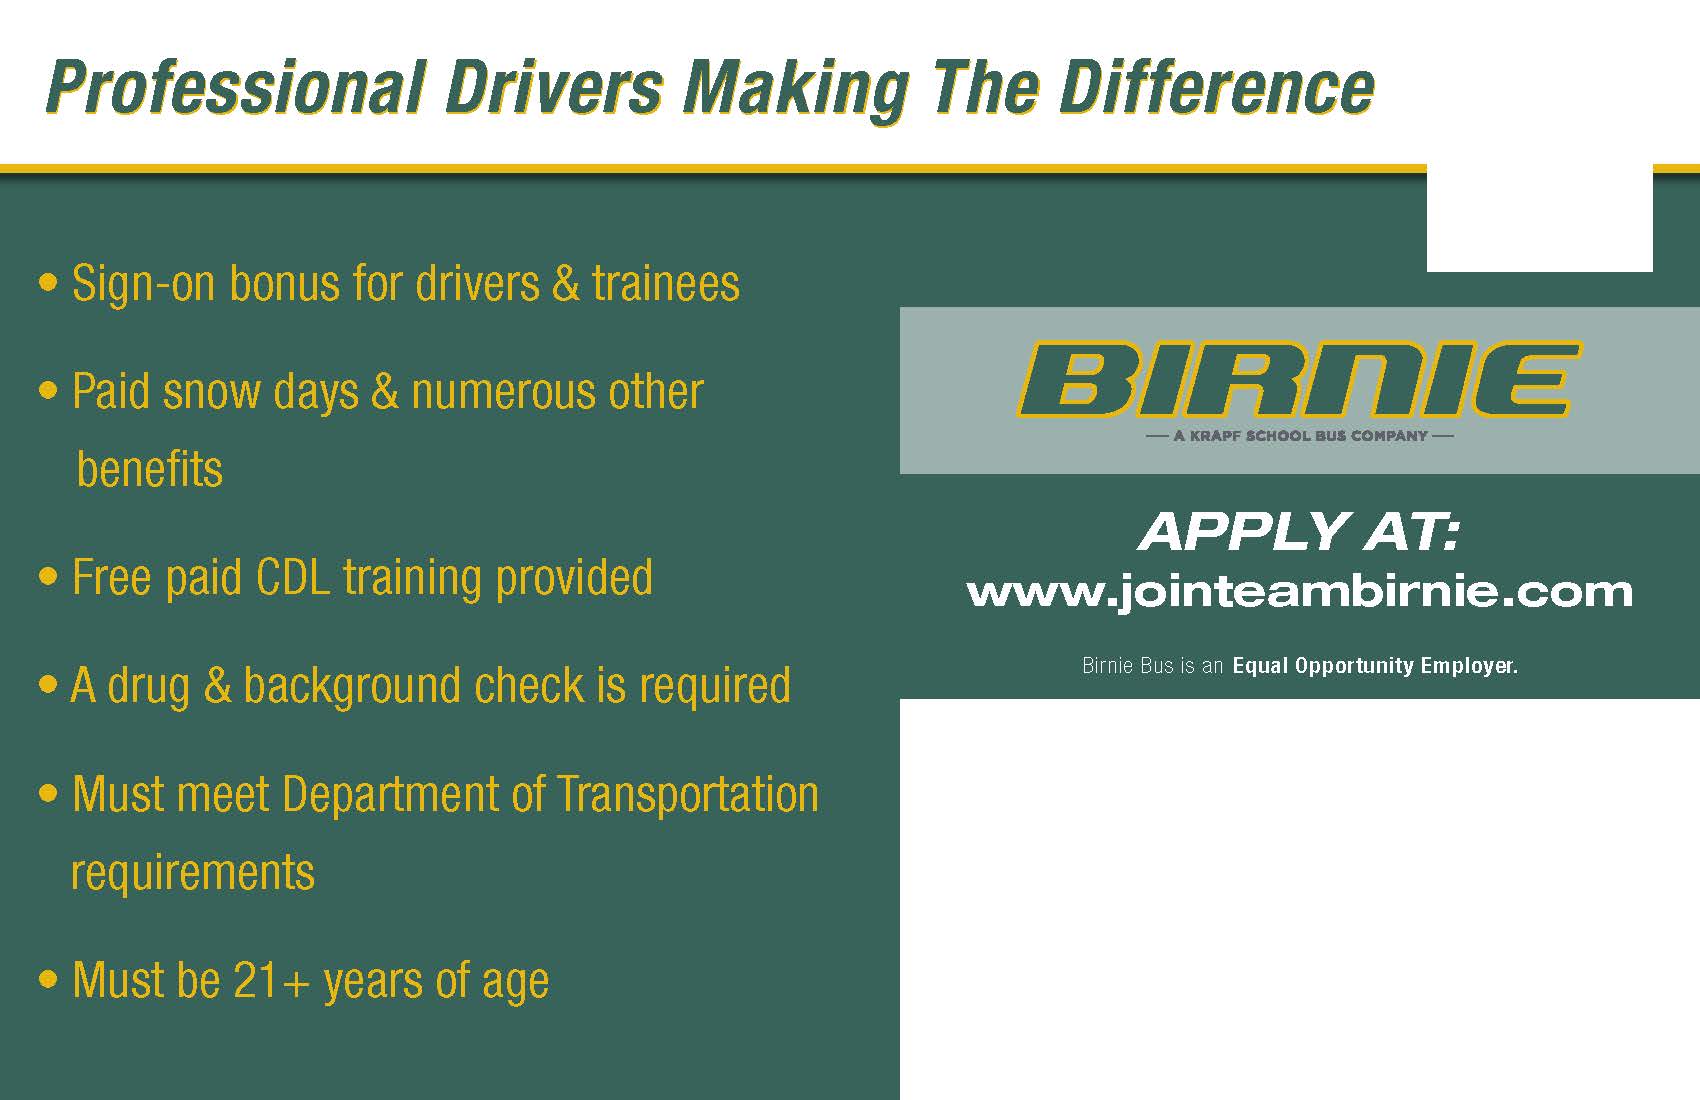 Professional Drivers Making the Difference. Sign-on bonus for drivers & trainees. Paid snow days & numerous other benefits. Free paid CDL training provided. A drug & background check is required. Must meet Department of Transportation requirements. Must be 21+ years of age. Birnie. Apply at: www.jointeambirnie.com. Birnie bus is an Equal Opportunity Employer. 